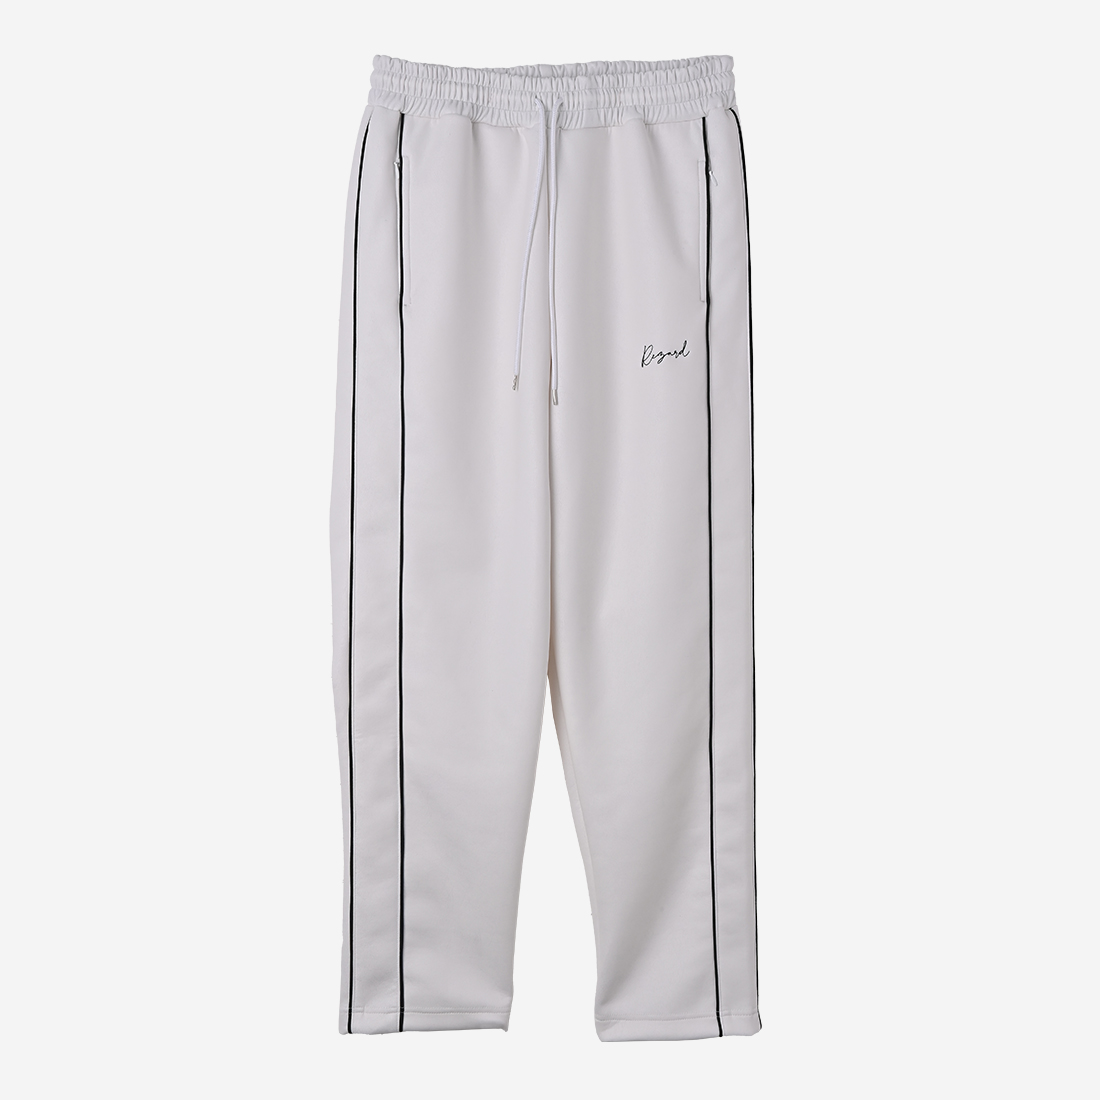 【ReZARD】Coated Piping Pants(White)